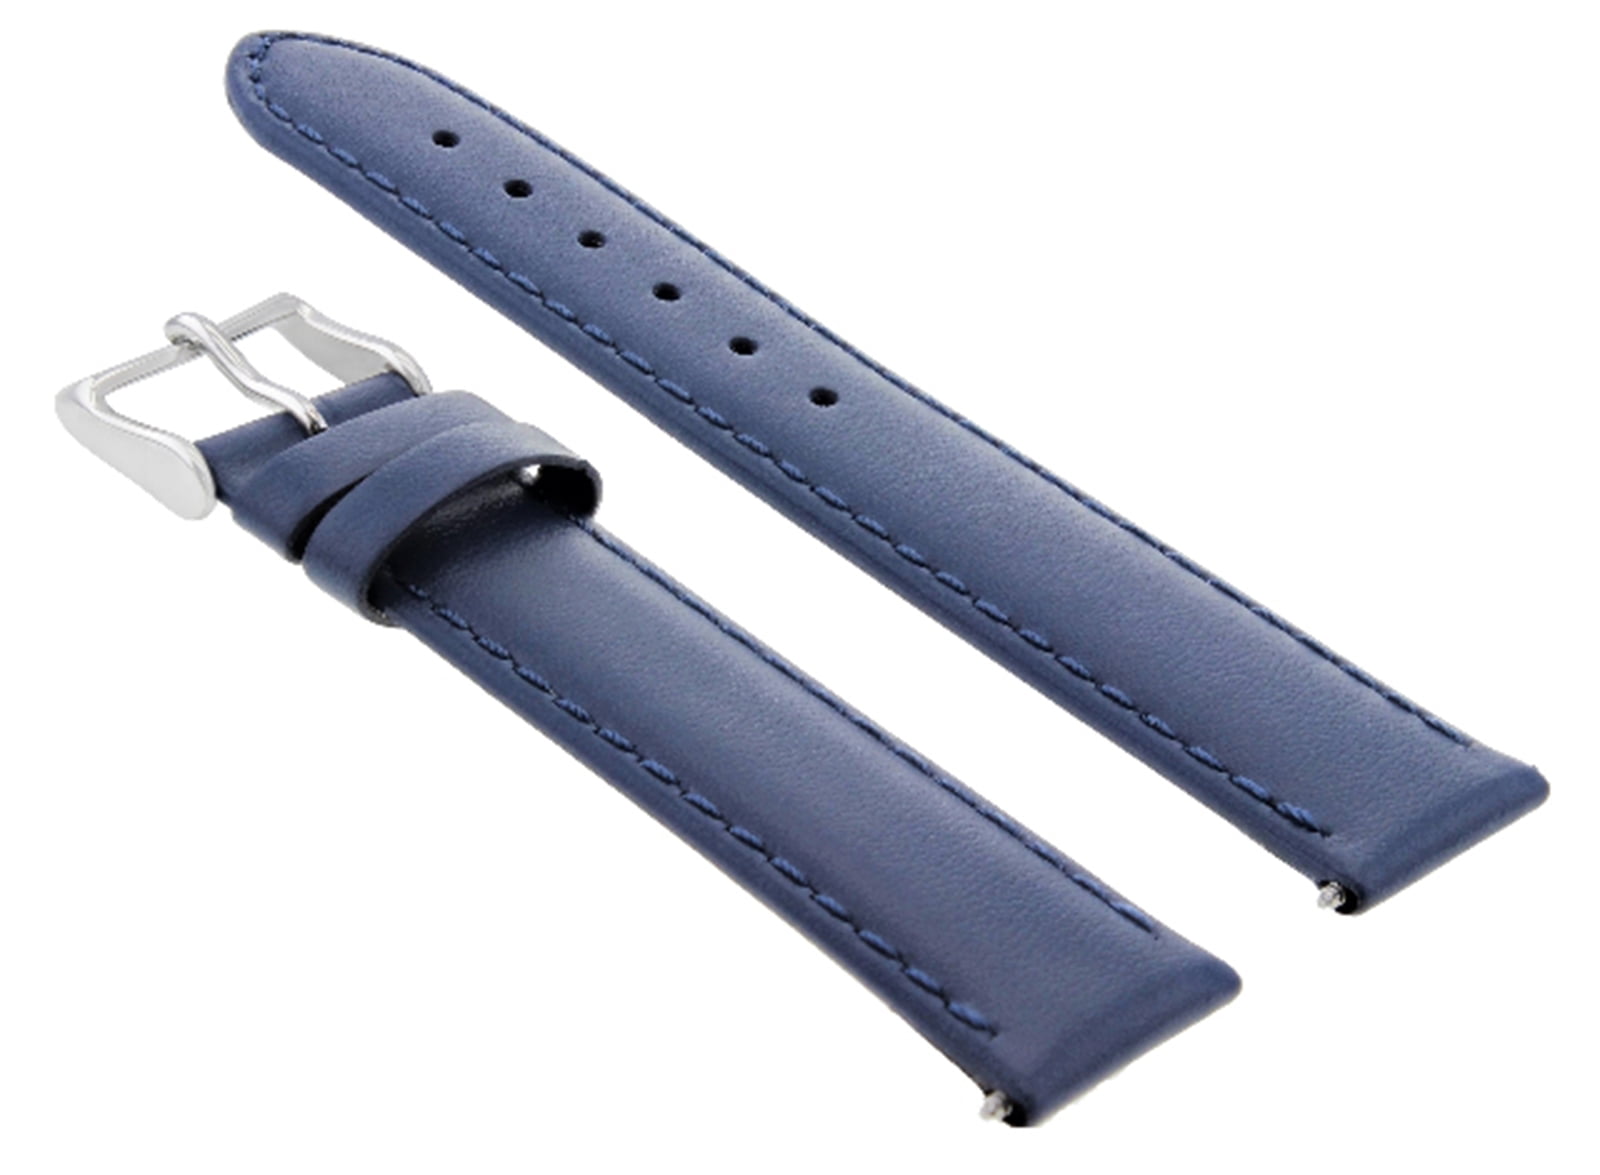 19MM GENUINE LEATHER WATCH BAND SMOOTH STRAP FOR SEIKO 5 7S26-3160 WATCH  BLUE 